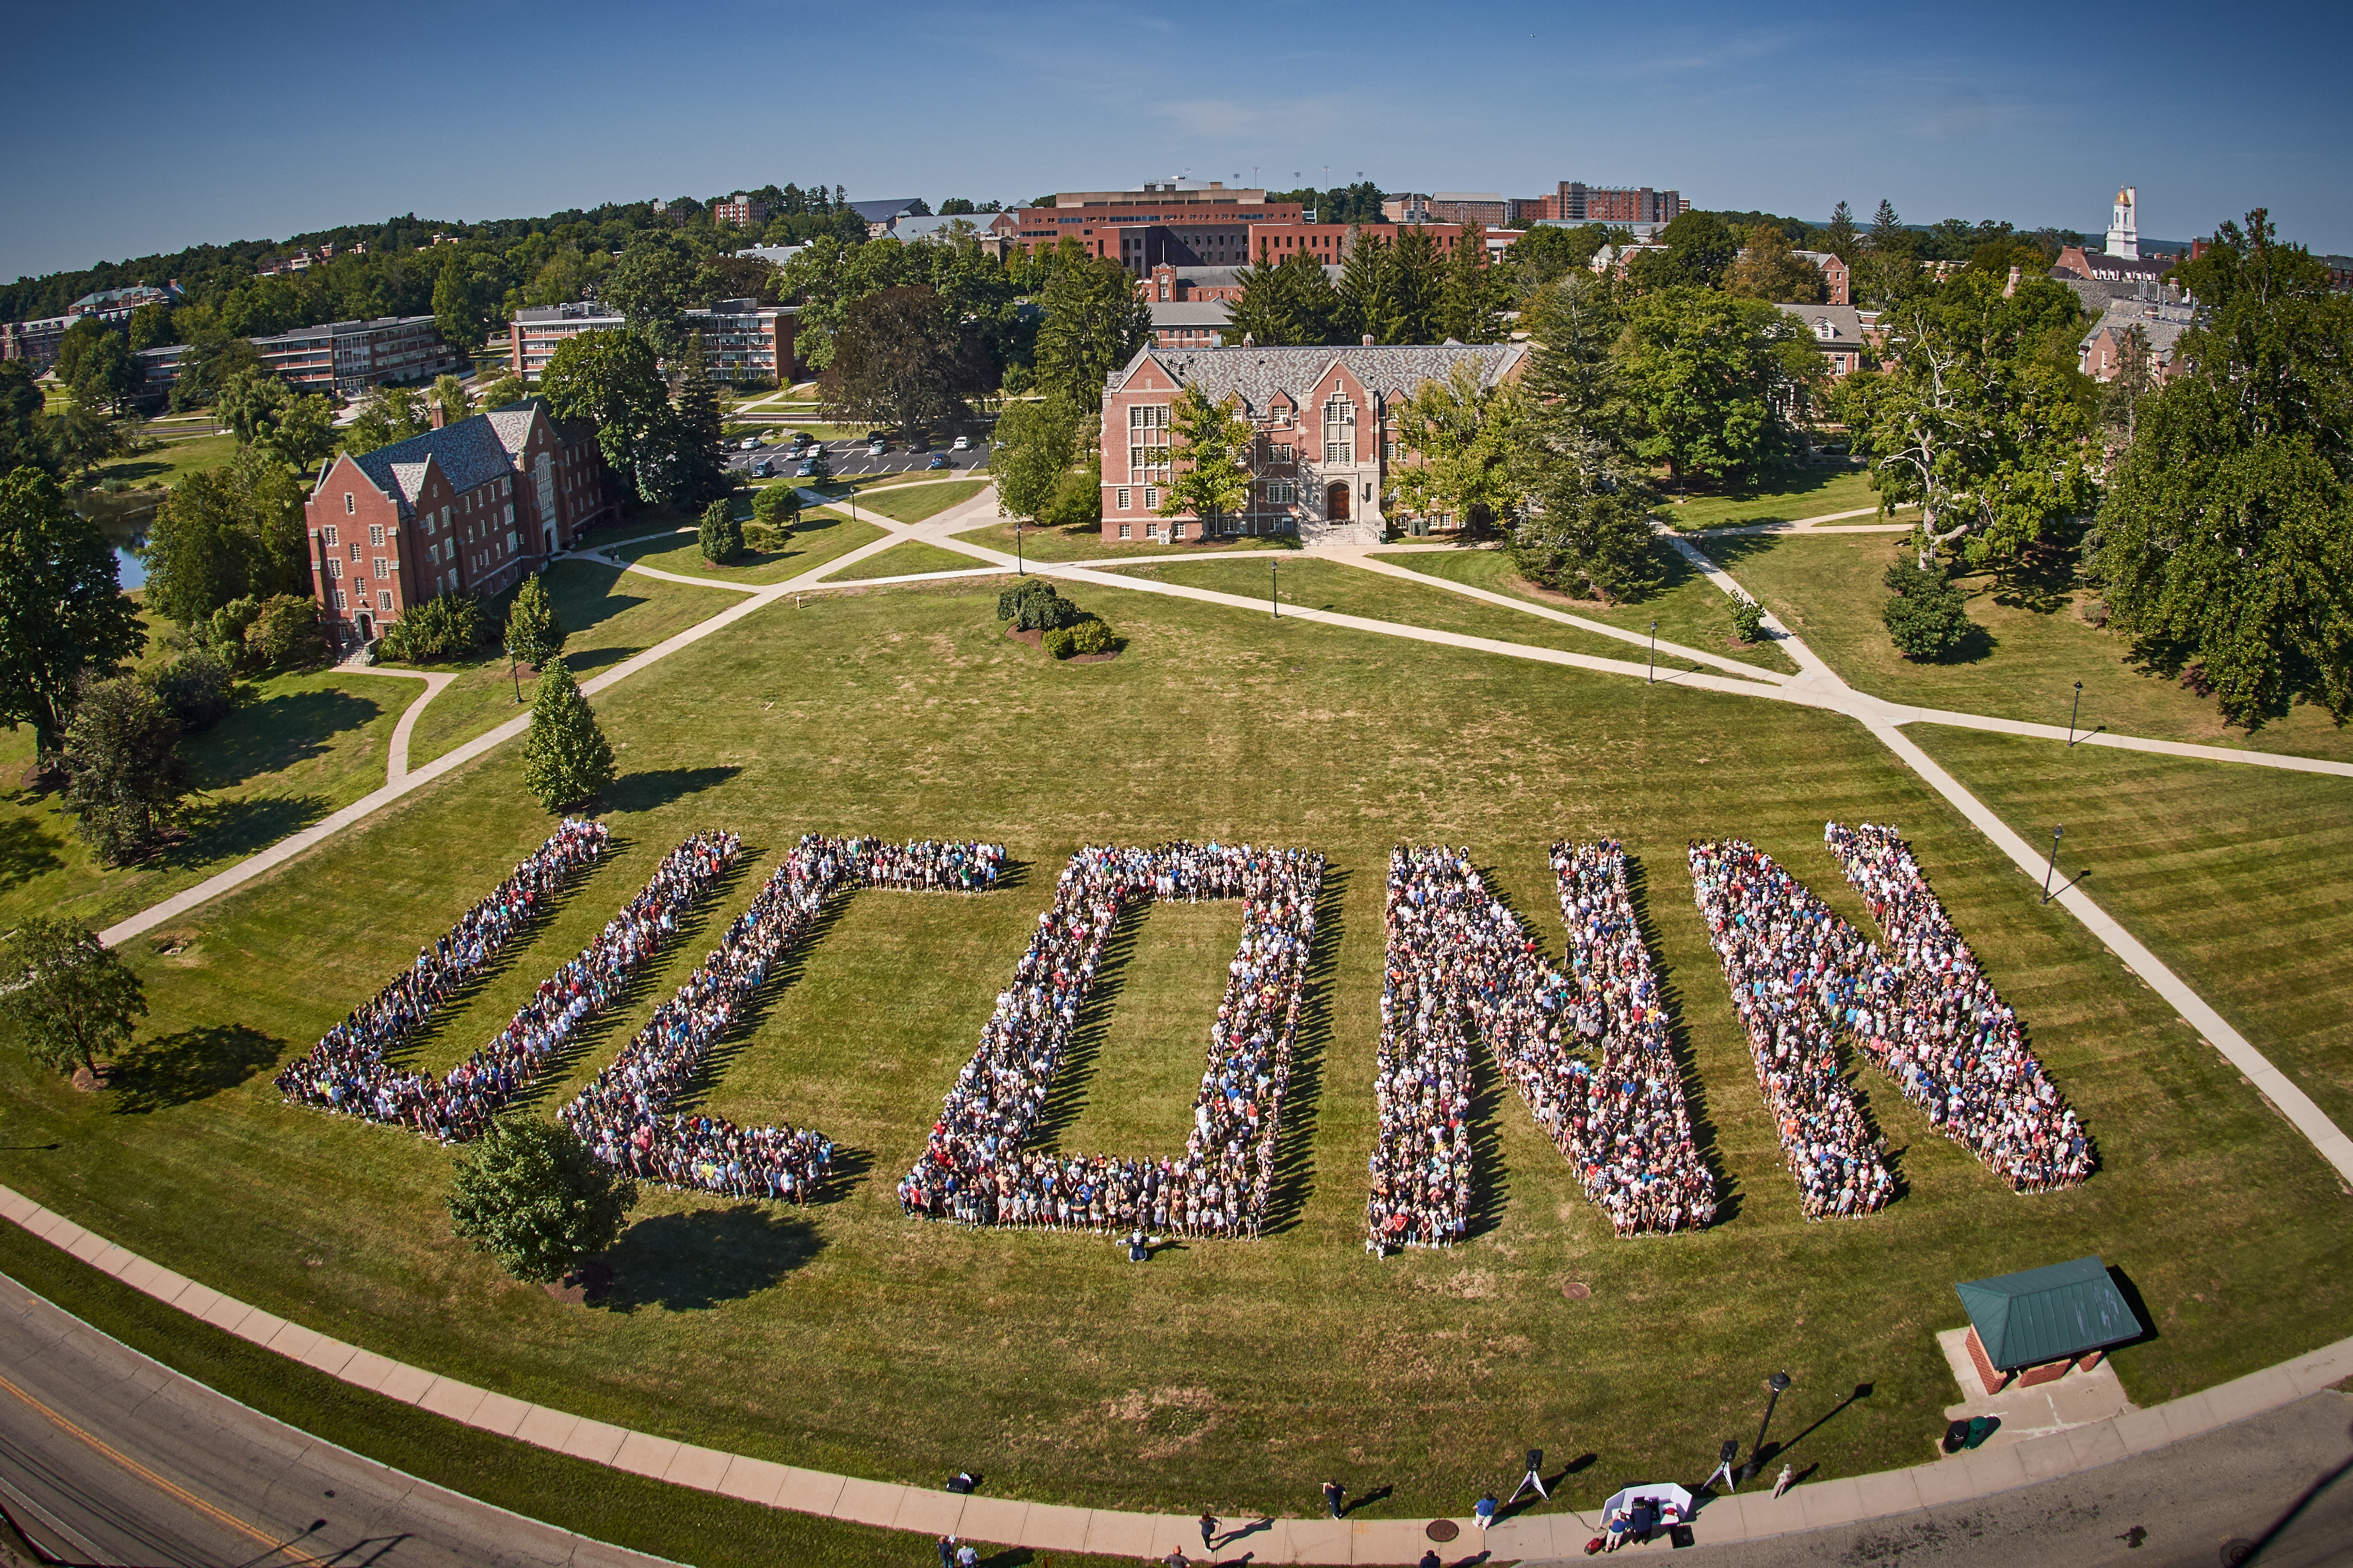 The class of 2020 poses to spell out UConn on the Great Lawn on Aug. 27, 2016. (Peter Morenus/UConn Photo)